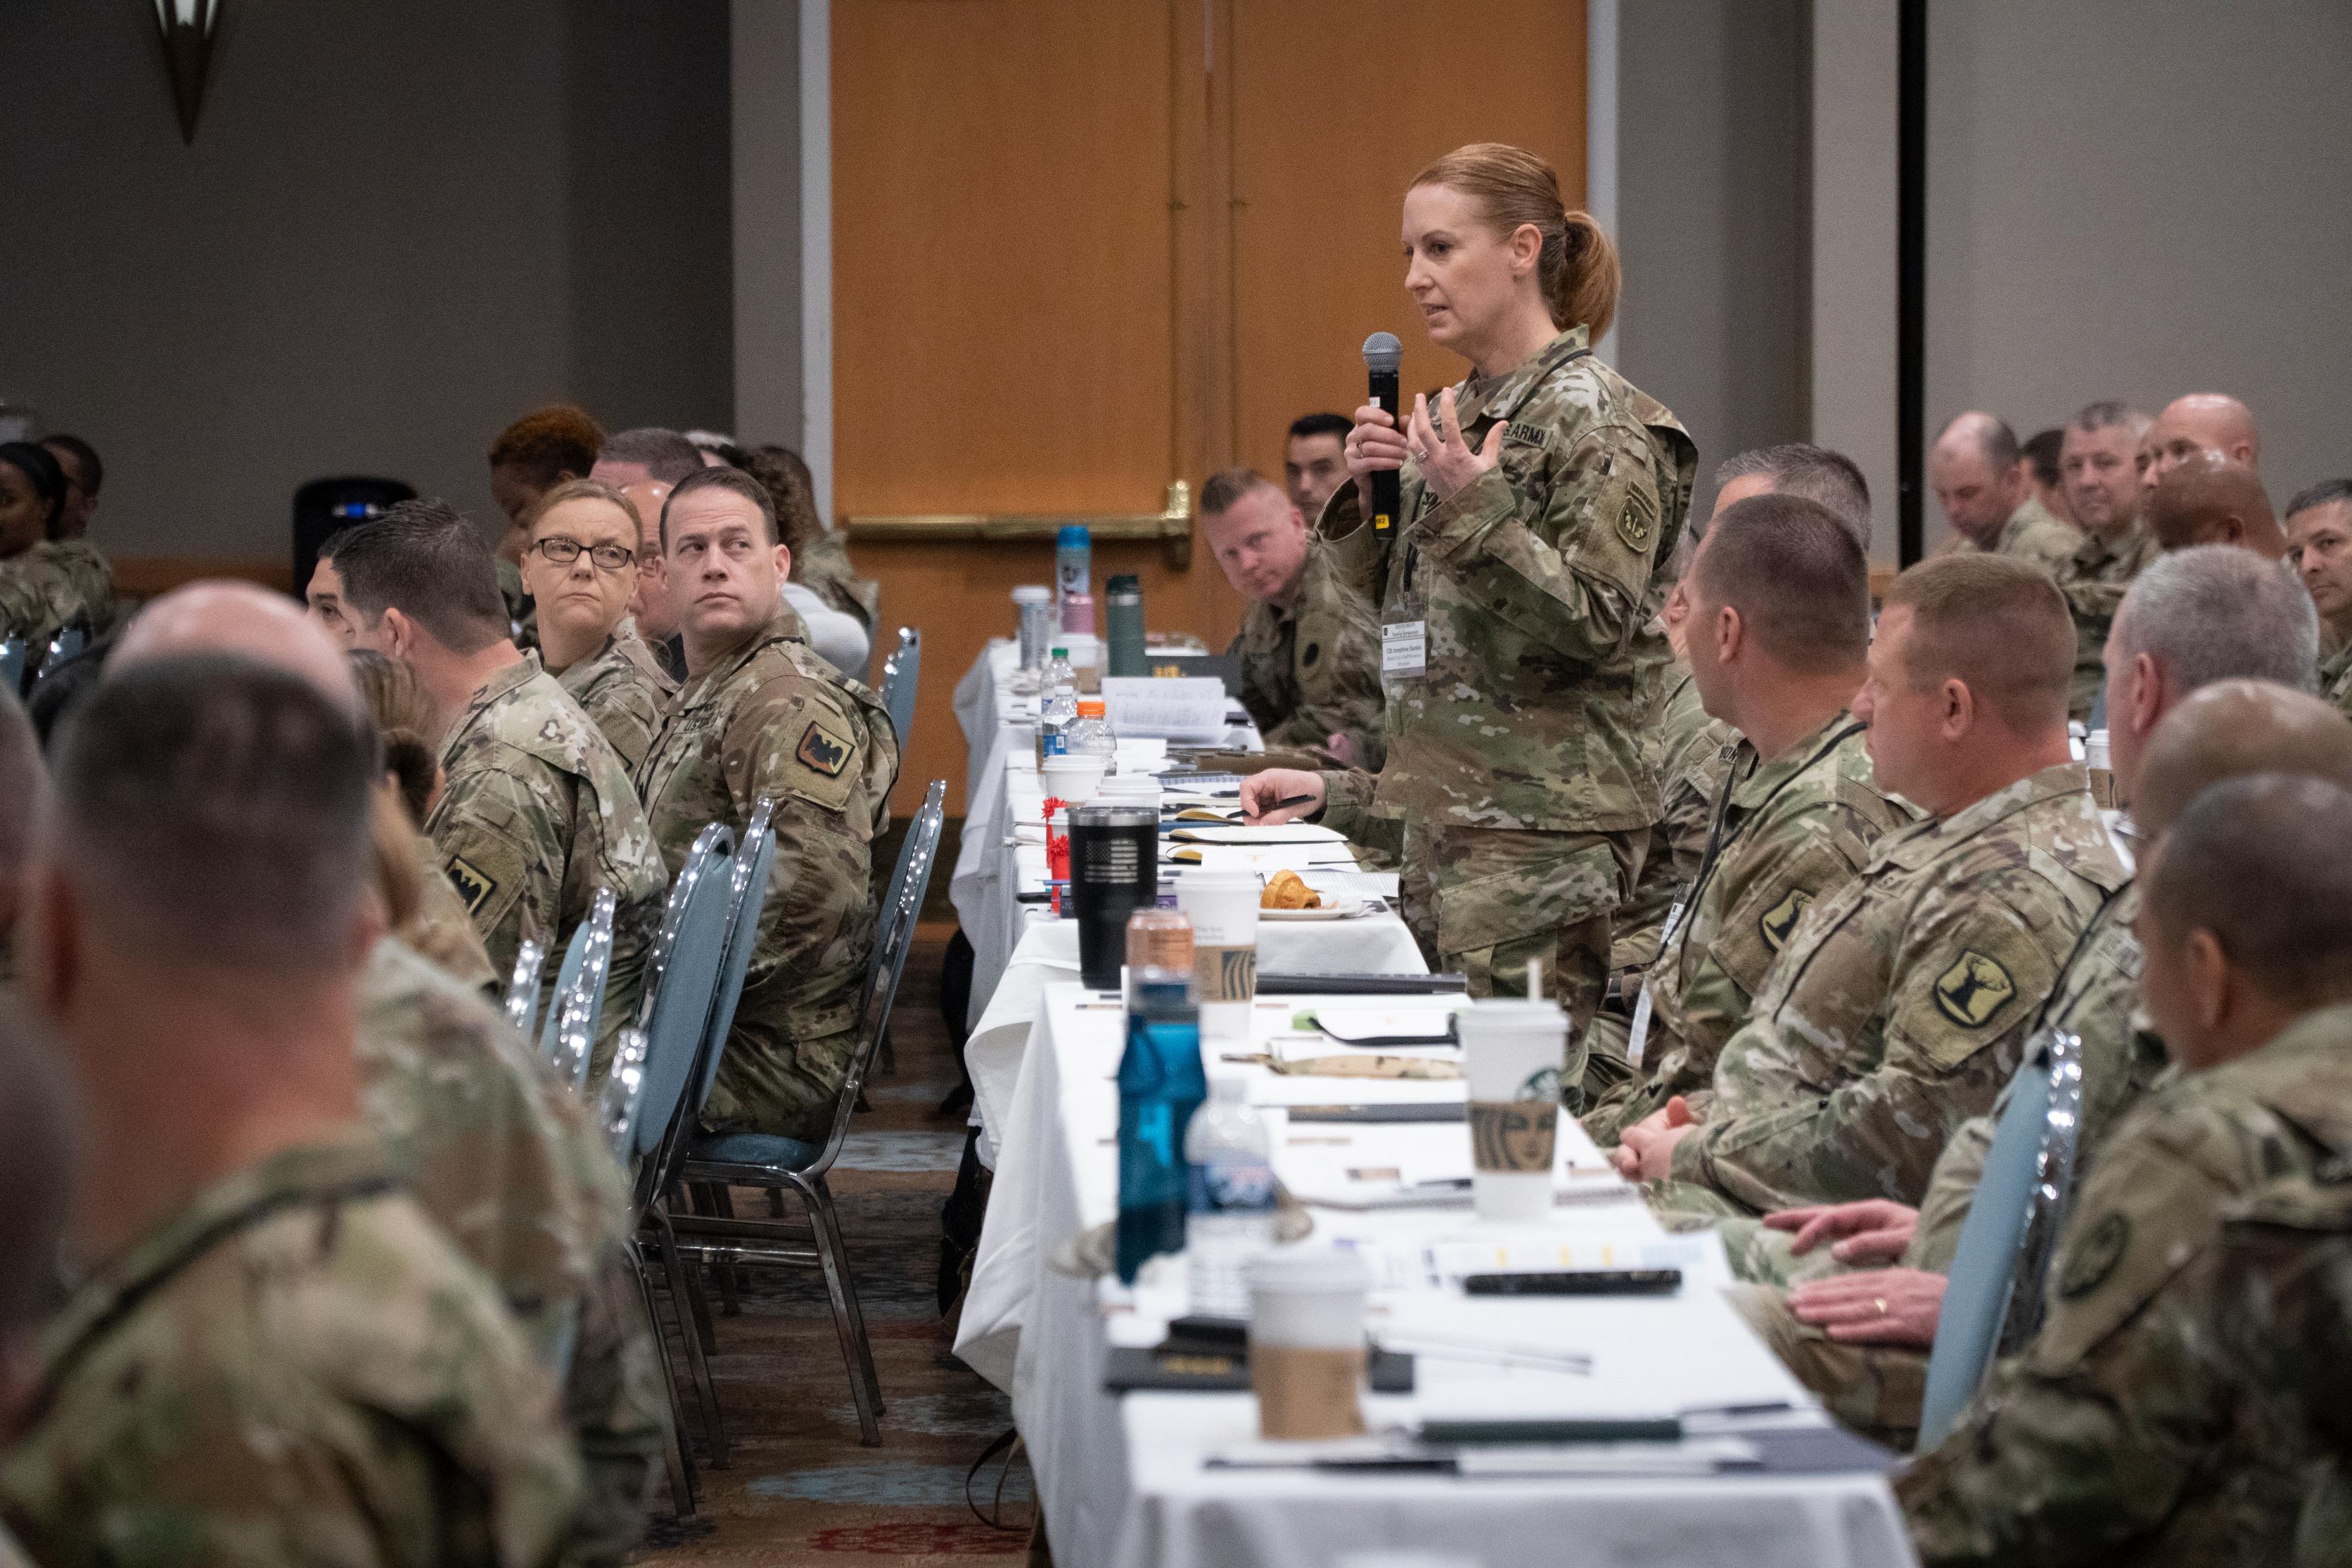 A military personnel officer asks Lt. Gen. Jon Jensen a question at the annual Army National Guard G1 Military Personnel Office workshop in Orlando, Florida, May 2 to May 4, 2023. The 2023 conference marked the first time the group has met in-person since before the COVID-19 pandemic began three years ago.